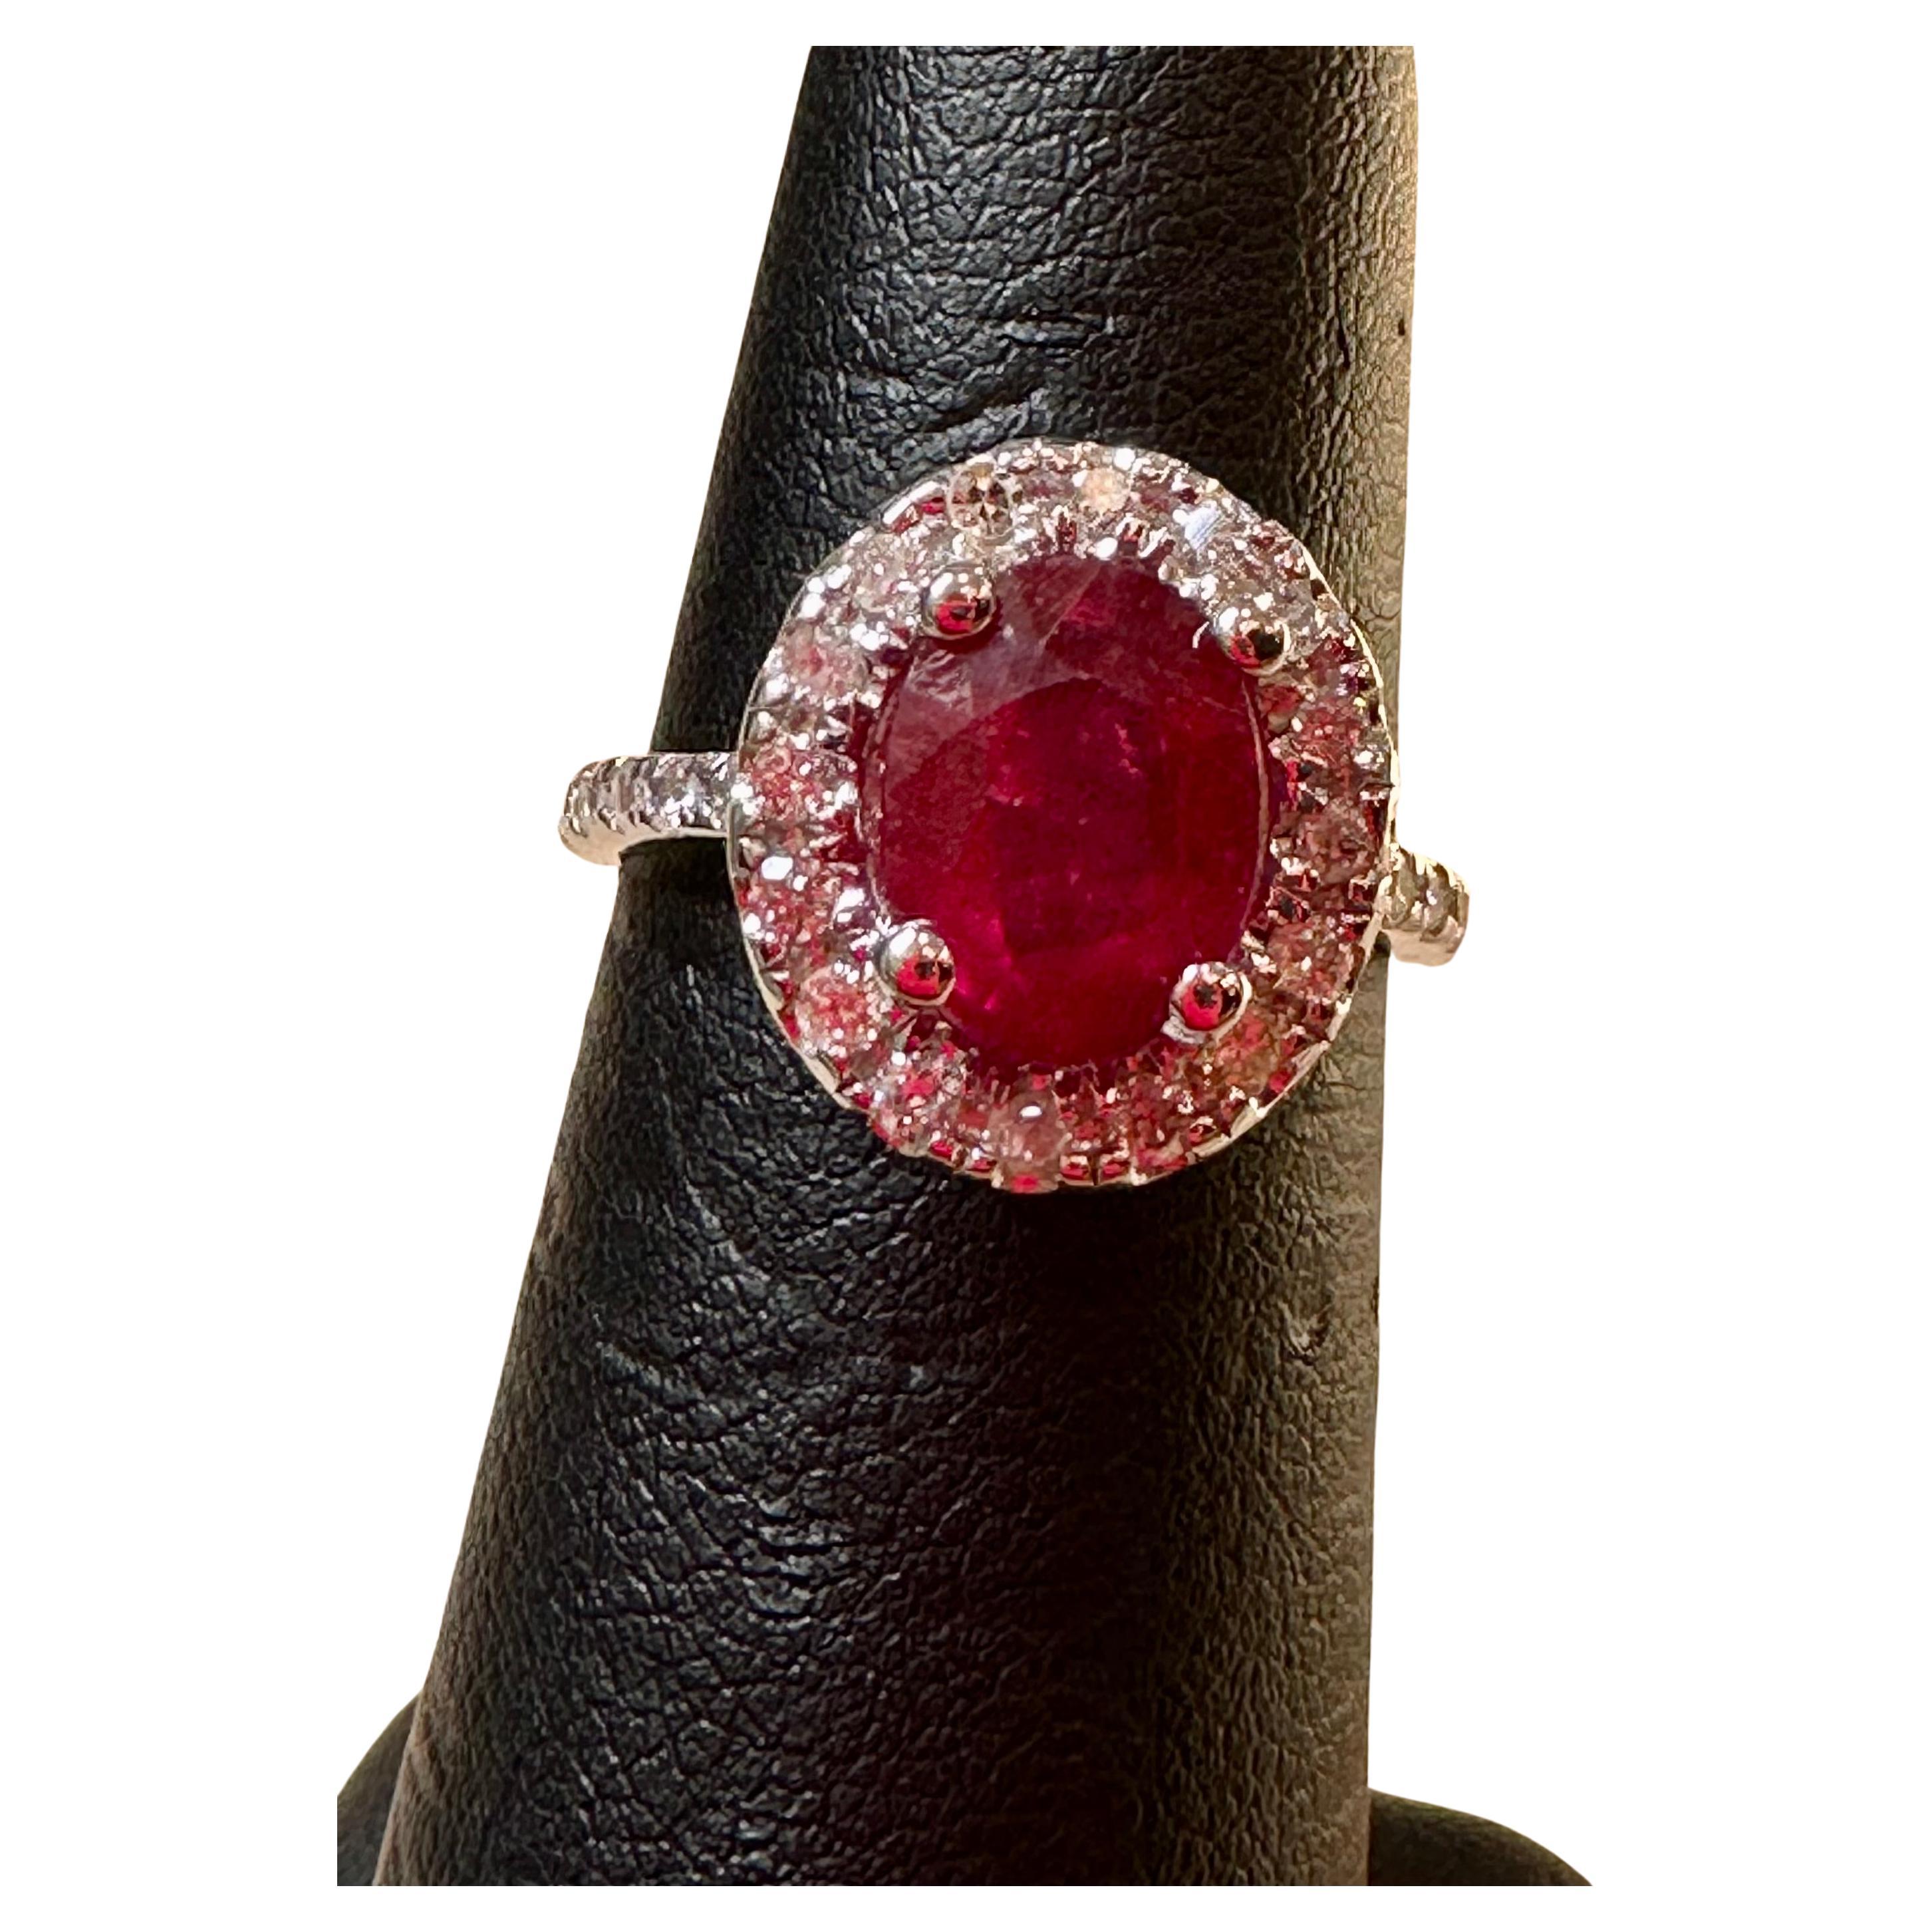 Introducing a truly stunning piece, behold the 3 Carat Oval Treated Ruby & 1.25 ct Diamond Ring in exquisite 14 Karat White Gold. This ring boasts a magnificent Treated Ruby meticulously cut to perfection, weighing approximately 3 carats.